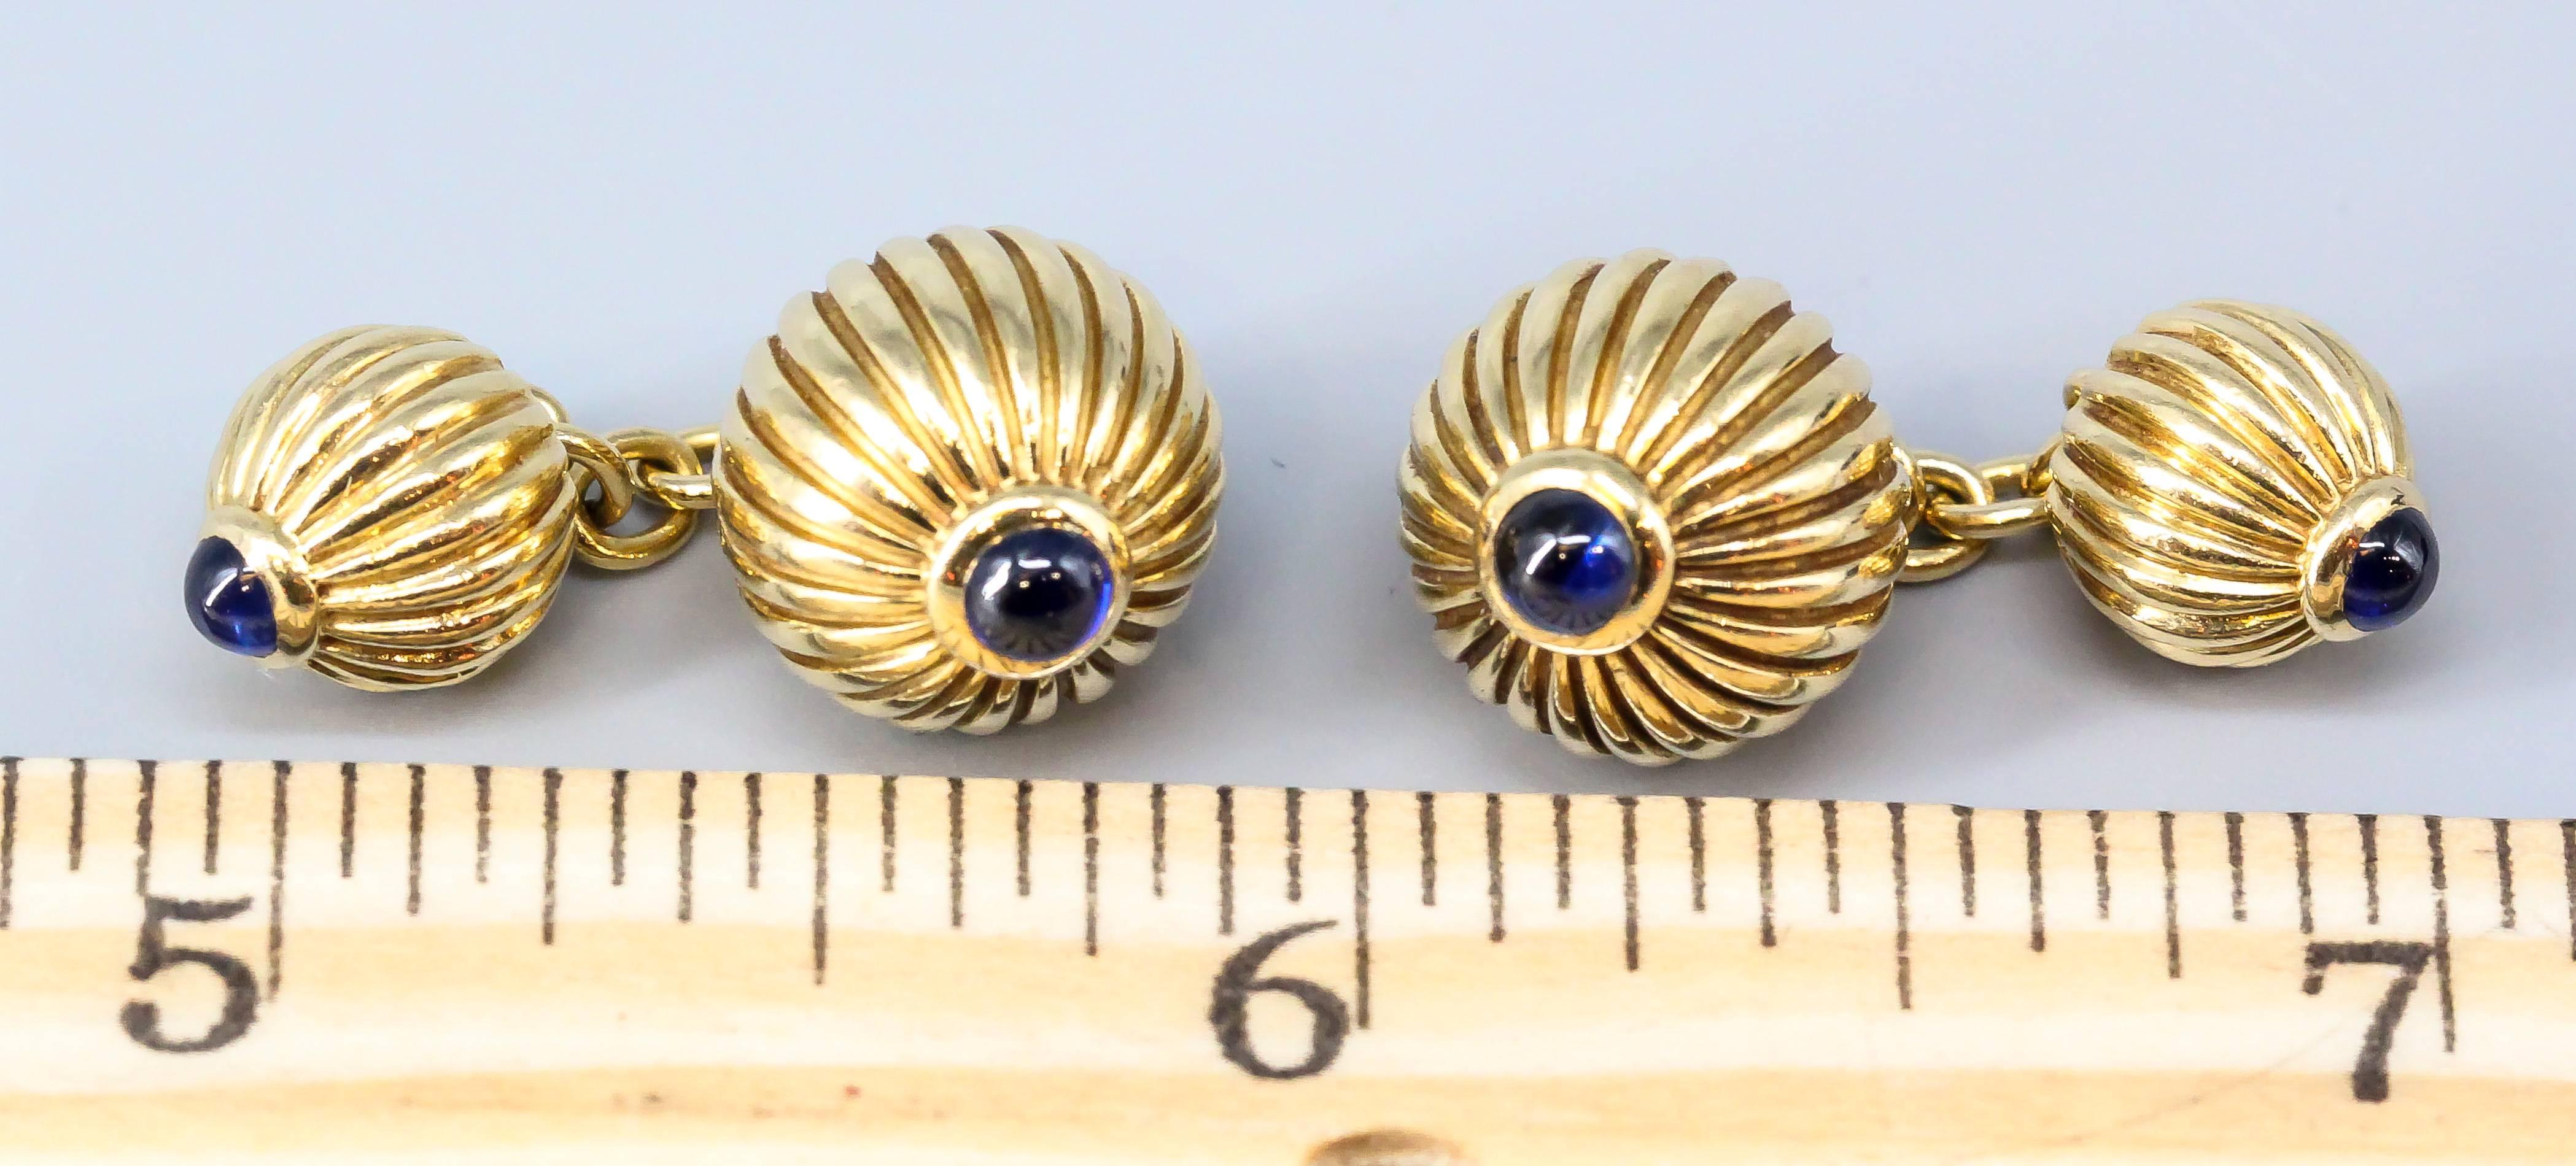 Elegant and rare sapphire and 18K gold ribbed sphere cufflinks by Cartier from the 